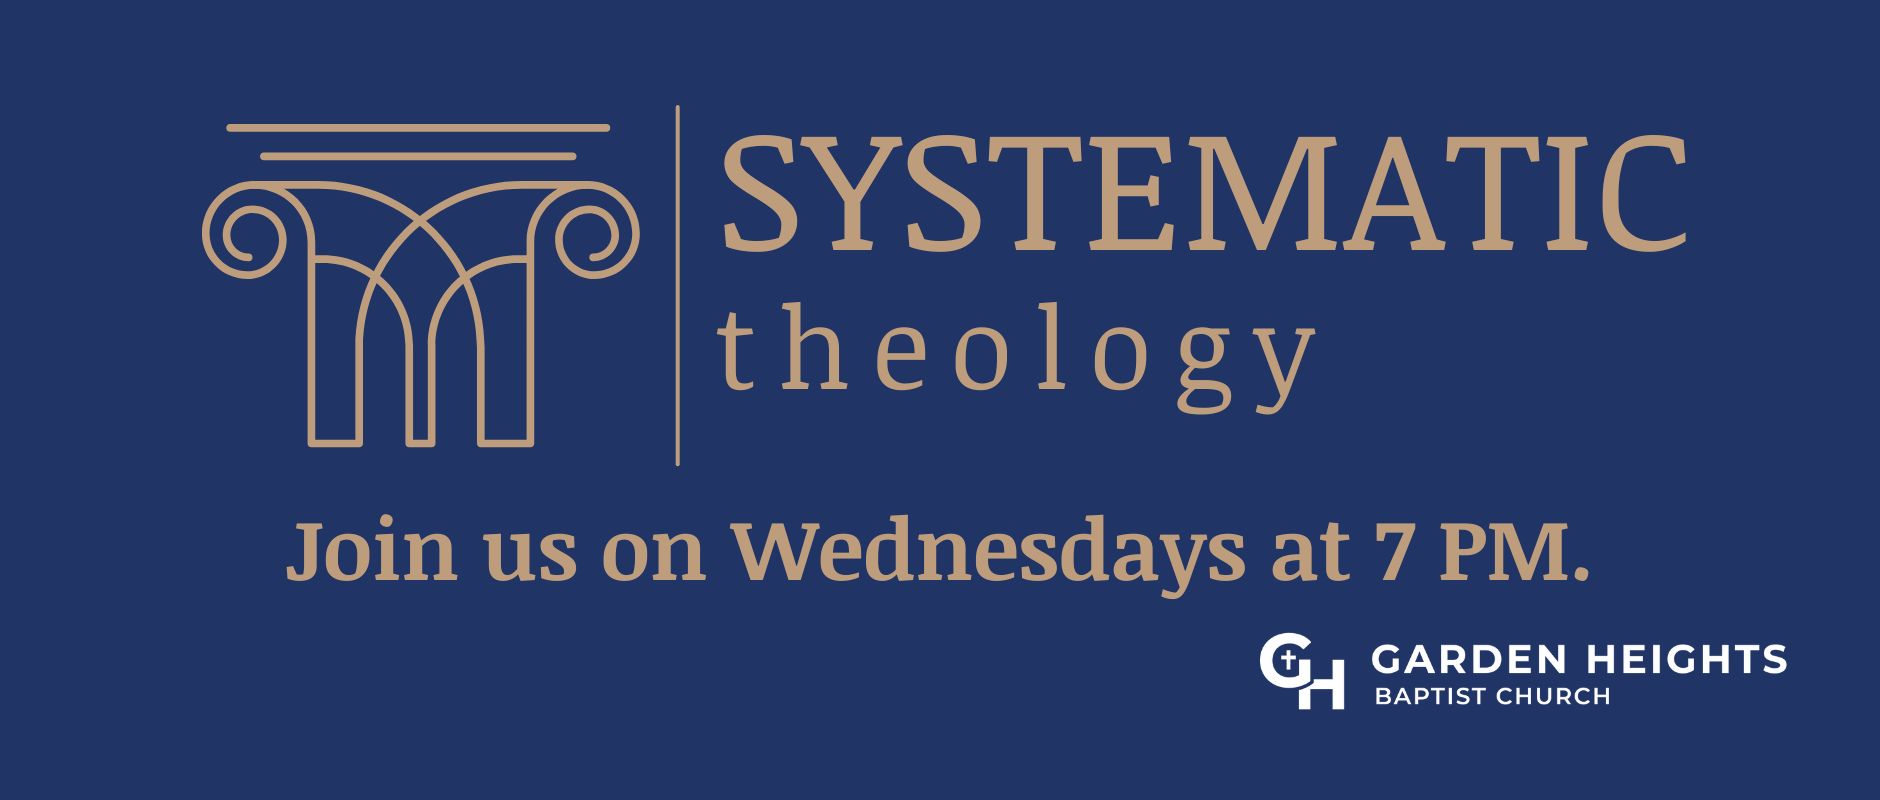 Systematic Theology series